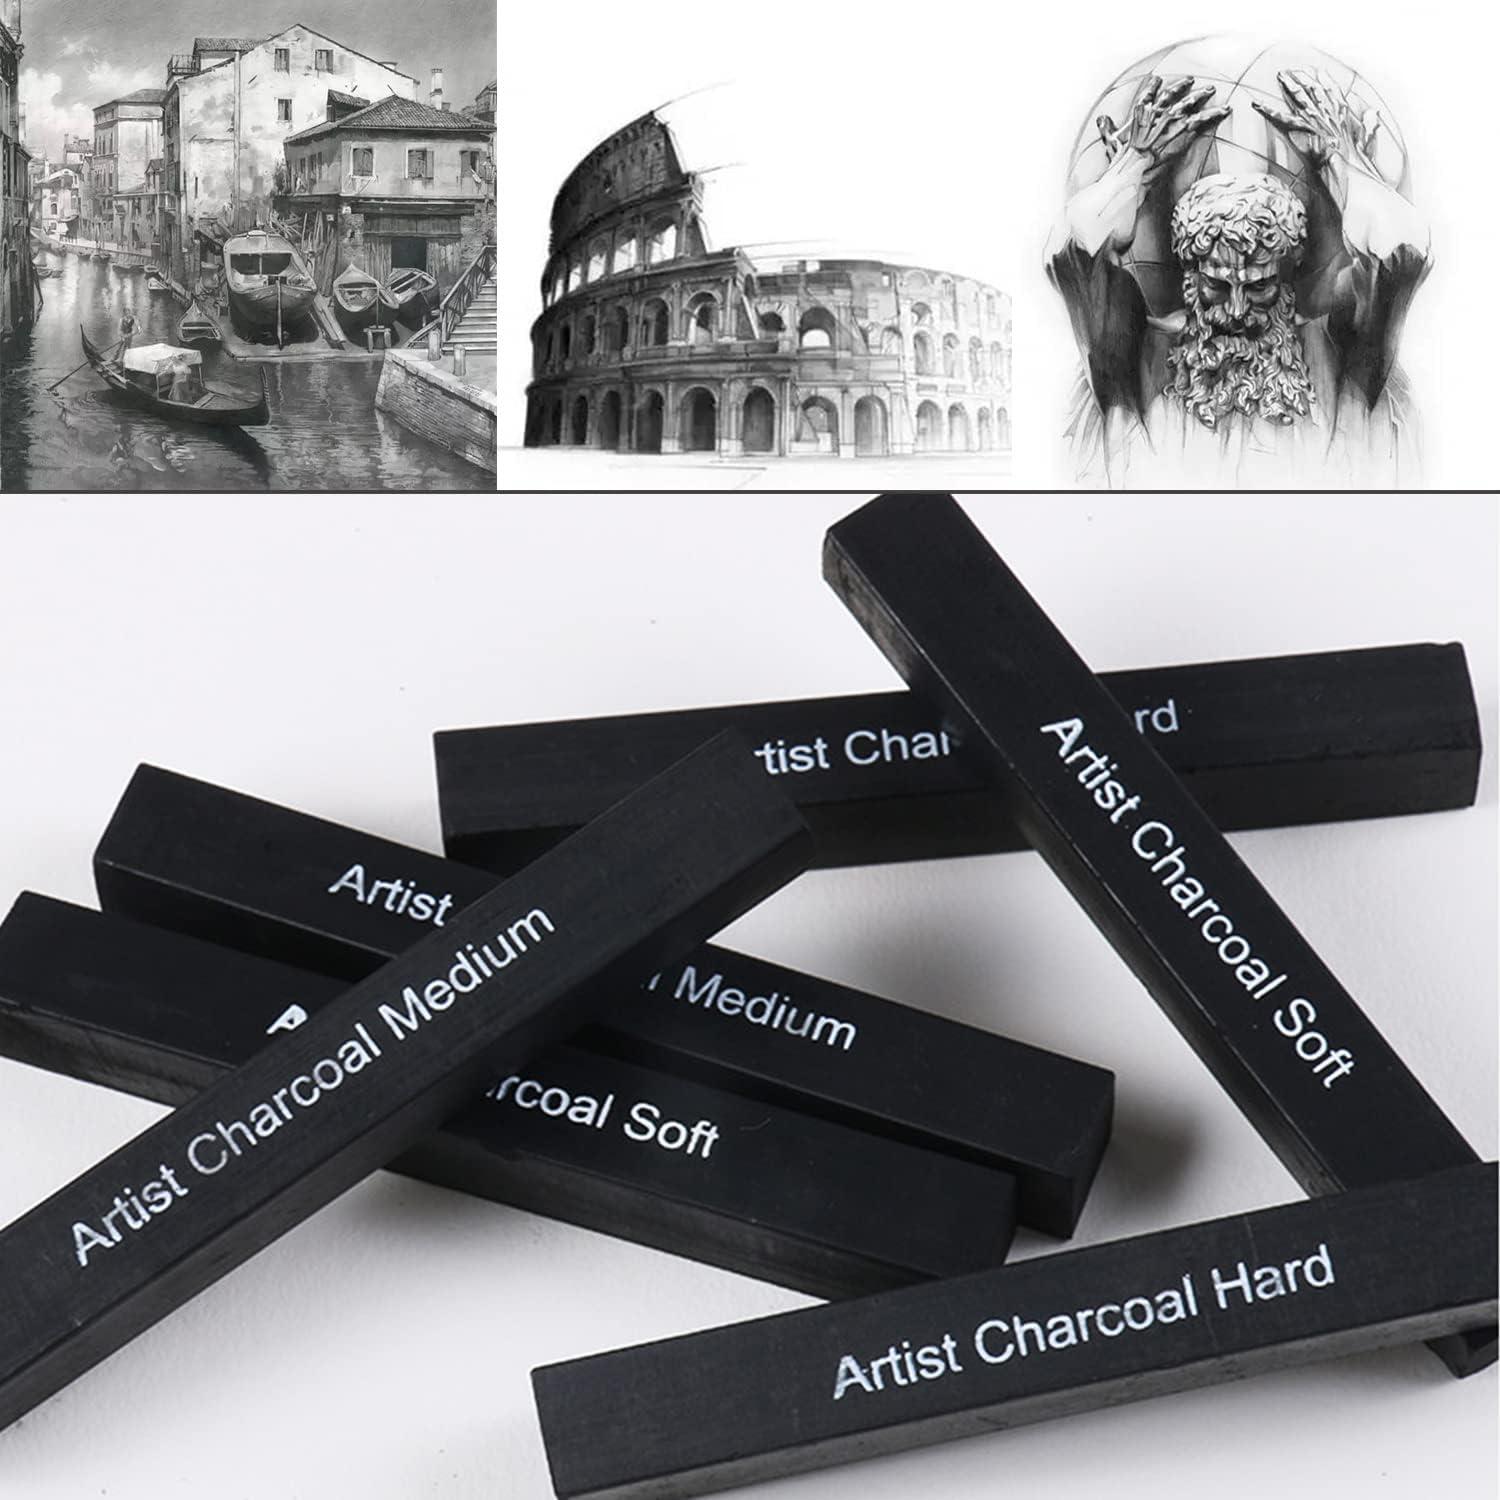 6Pcs Compressed Charcoal Sticks Soft Medium Hard Grade Graphite Sticks Vine  Charcoal Sticks for Drawing Charcoal Drawing Set For Sketching Shading